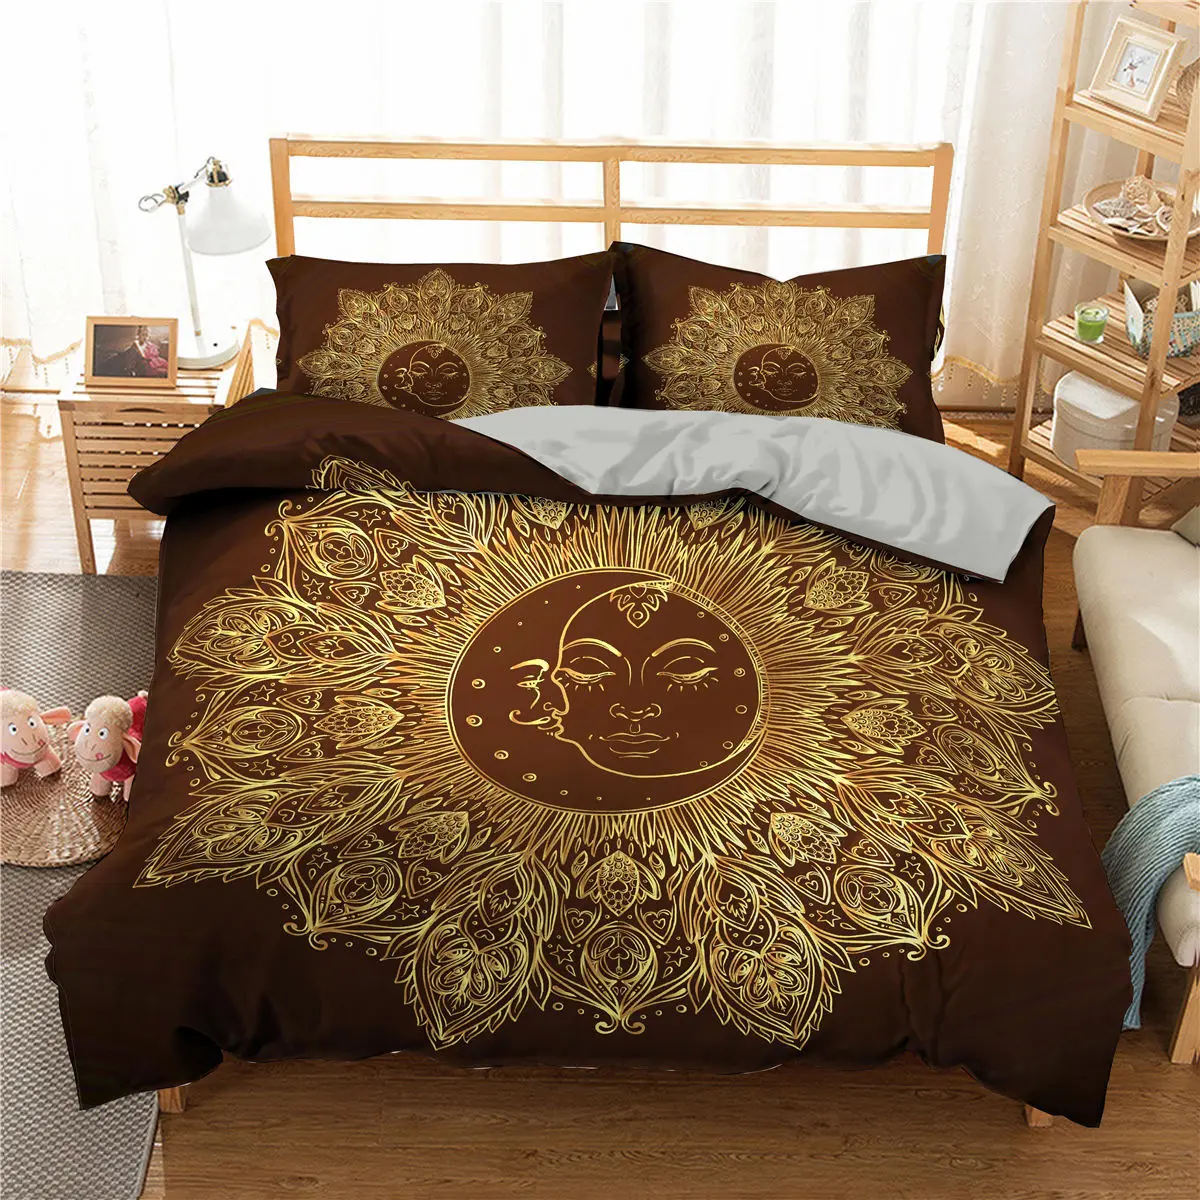 100% Cotton Super King Size Ethnic Bedding Set Duvet Quilt Cover And Pillowcases 